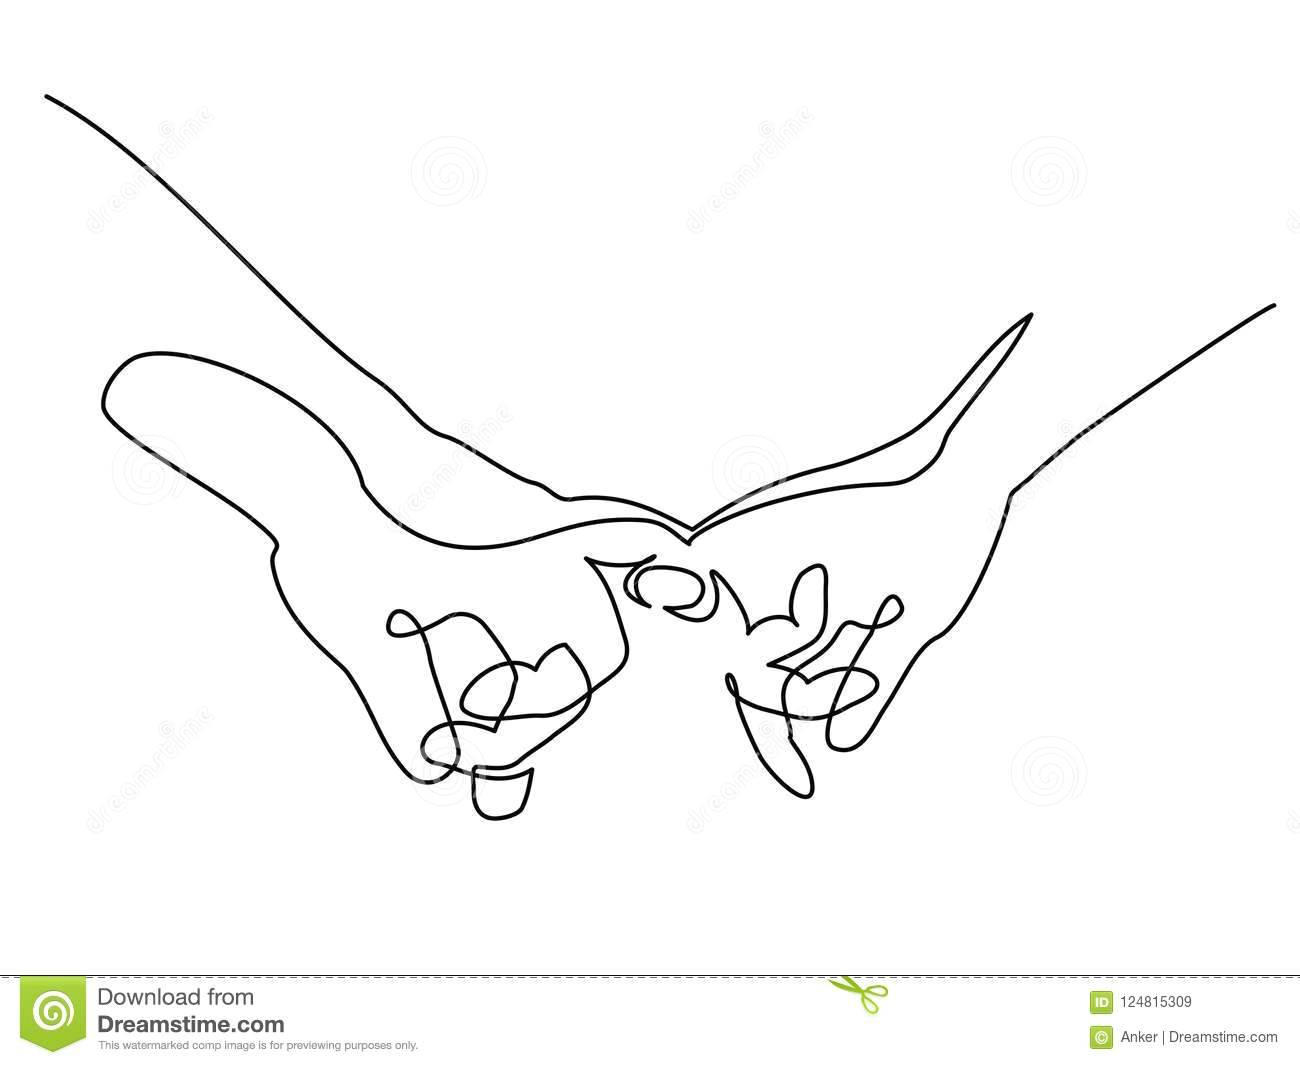 Drawing Ideas Holding Hands Hands Woman and Man Holding together with Fingers Stock Vector